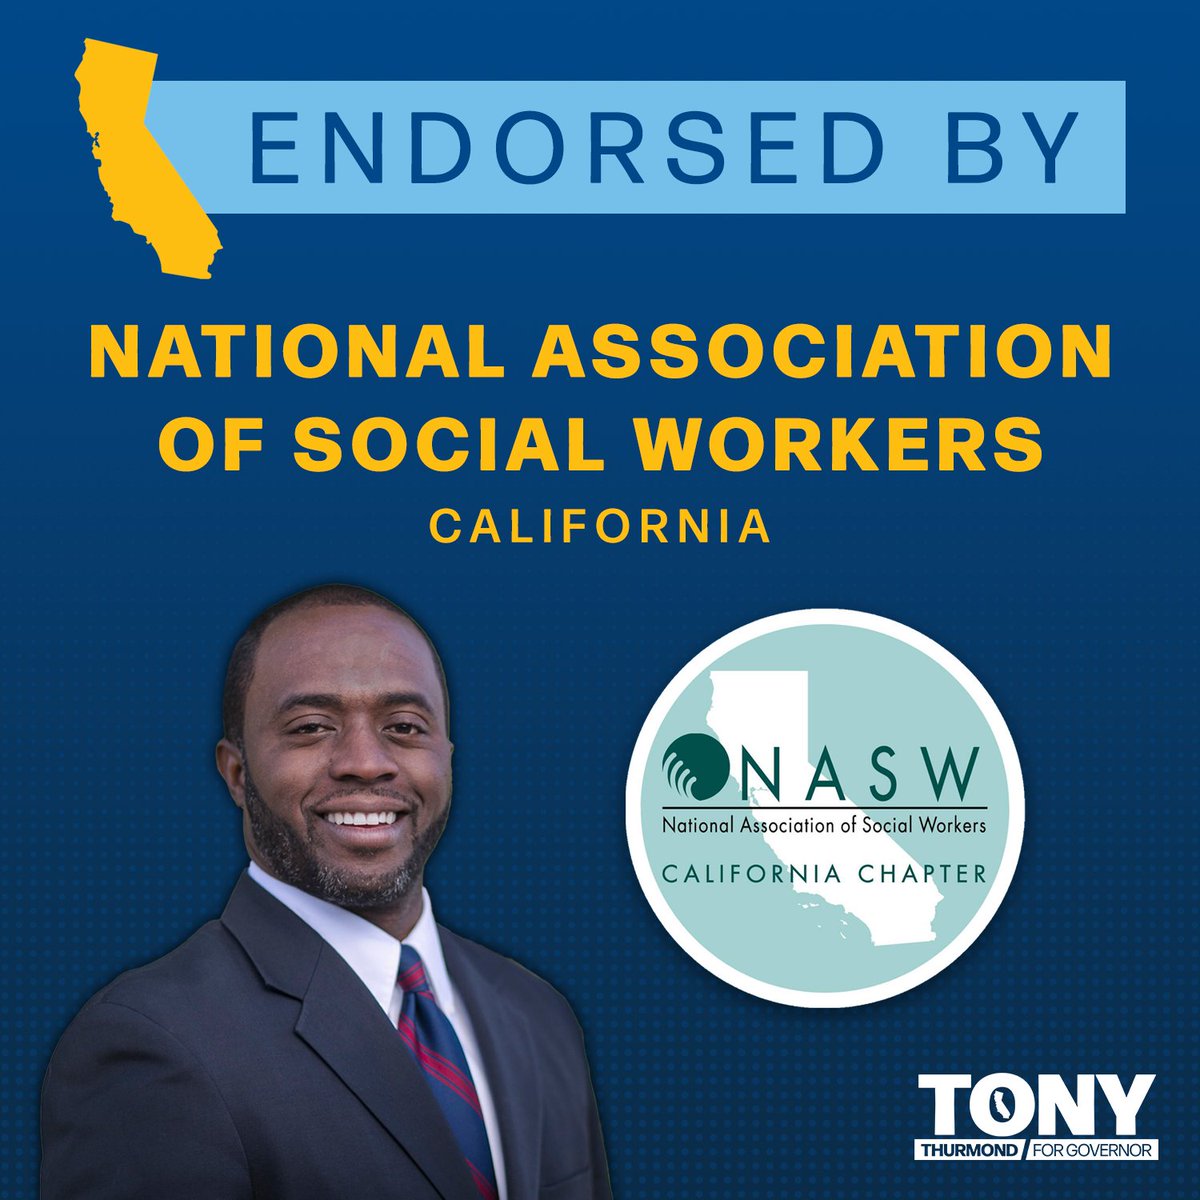 I'm honored to have the support of the National Association of Social Workers - California. Our dedication to helping others has been guided by my time as a social worker, and I'll always fight to ensure that their critical work is uplifted and supported.